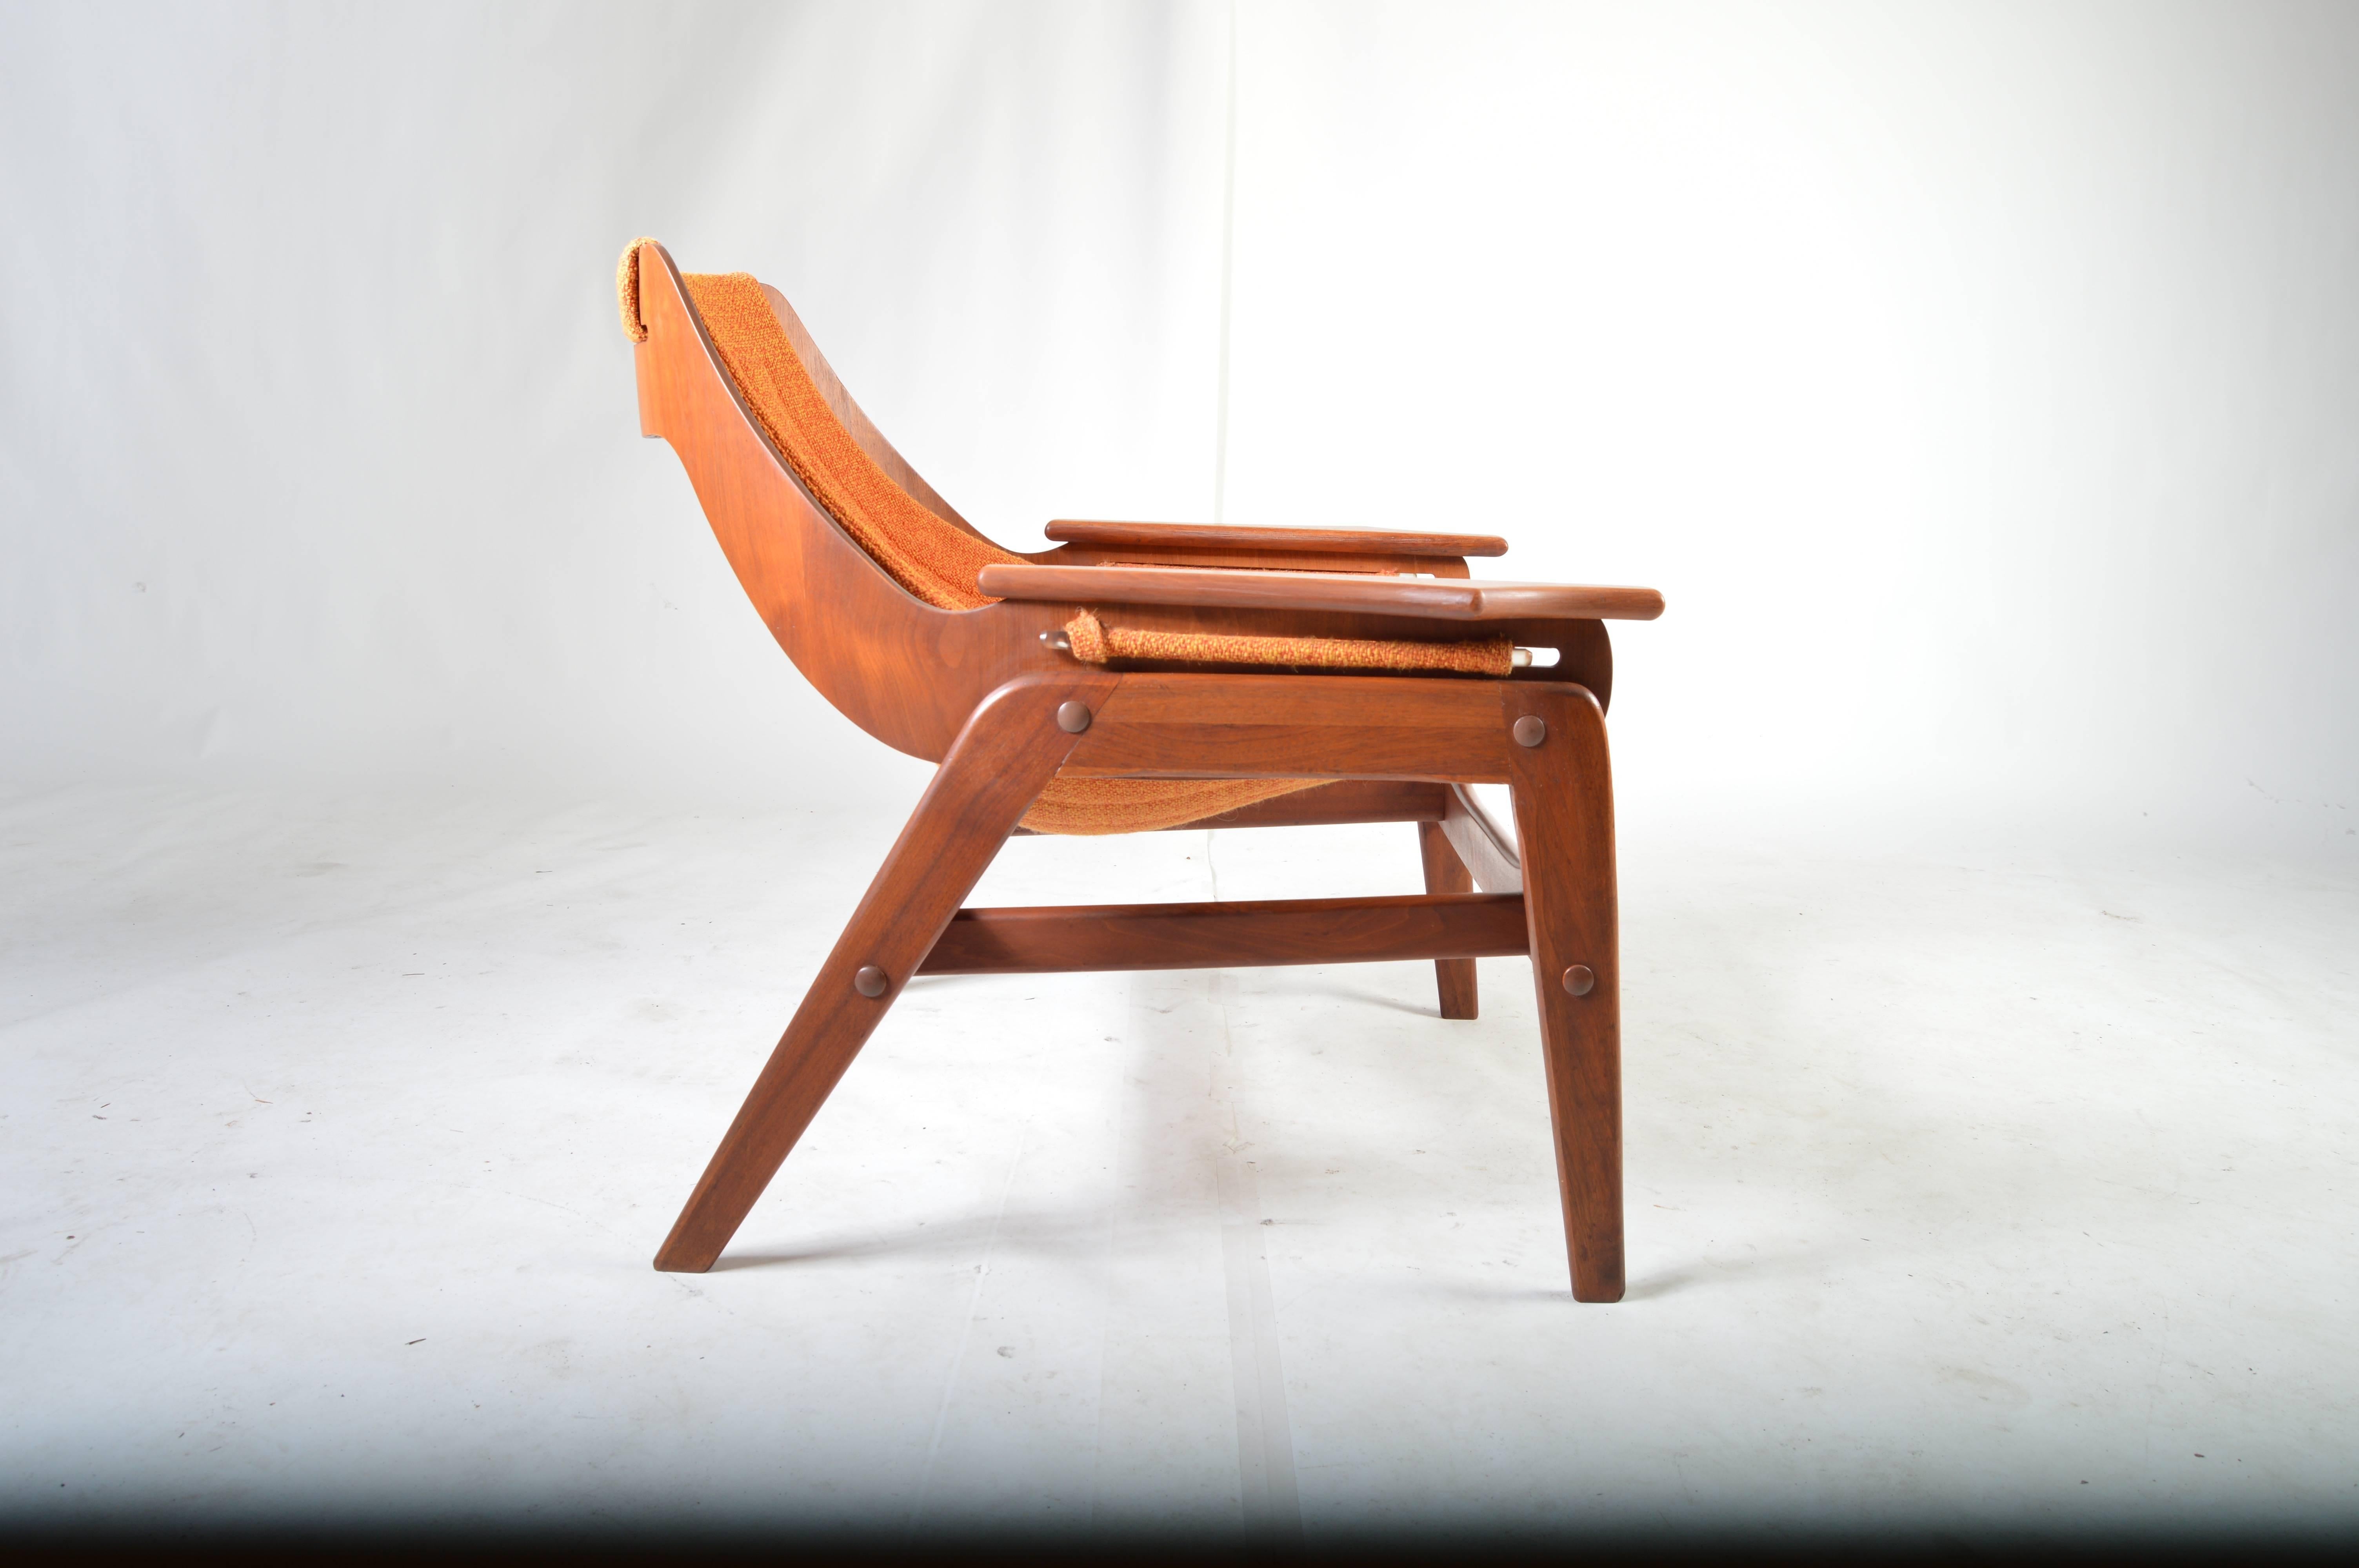 A very cool classic bentwood design having sculptural walnut frame and thick, durable tweed sling. Very comfortable. 